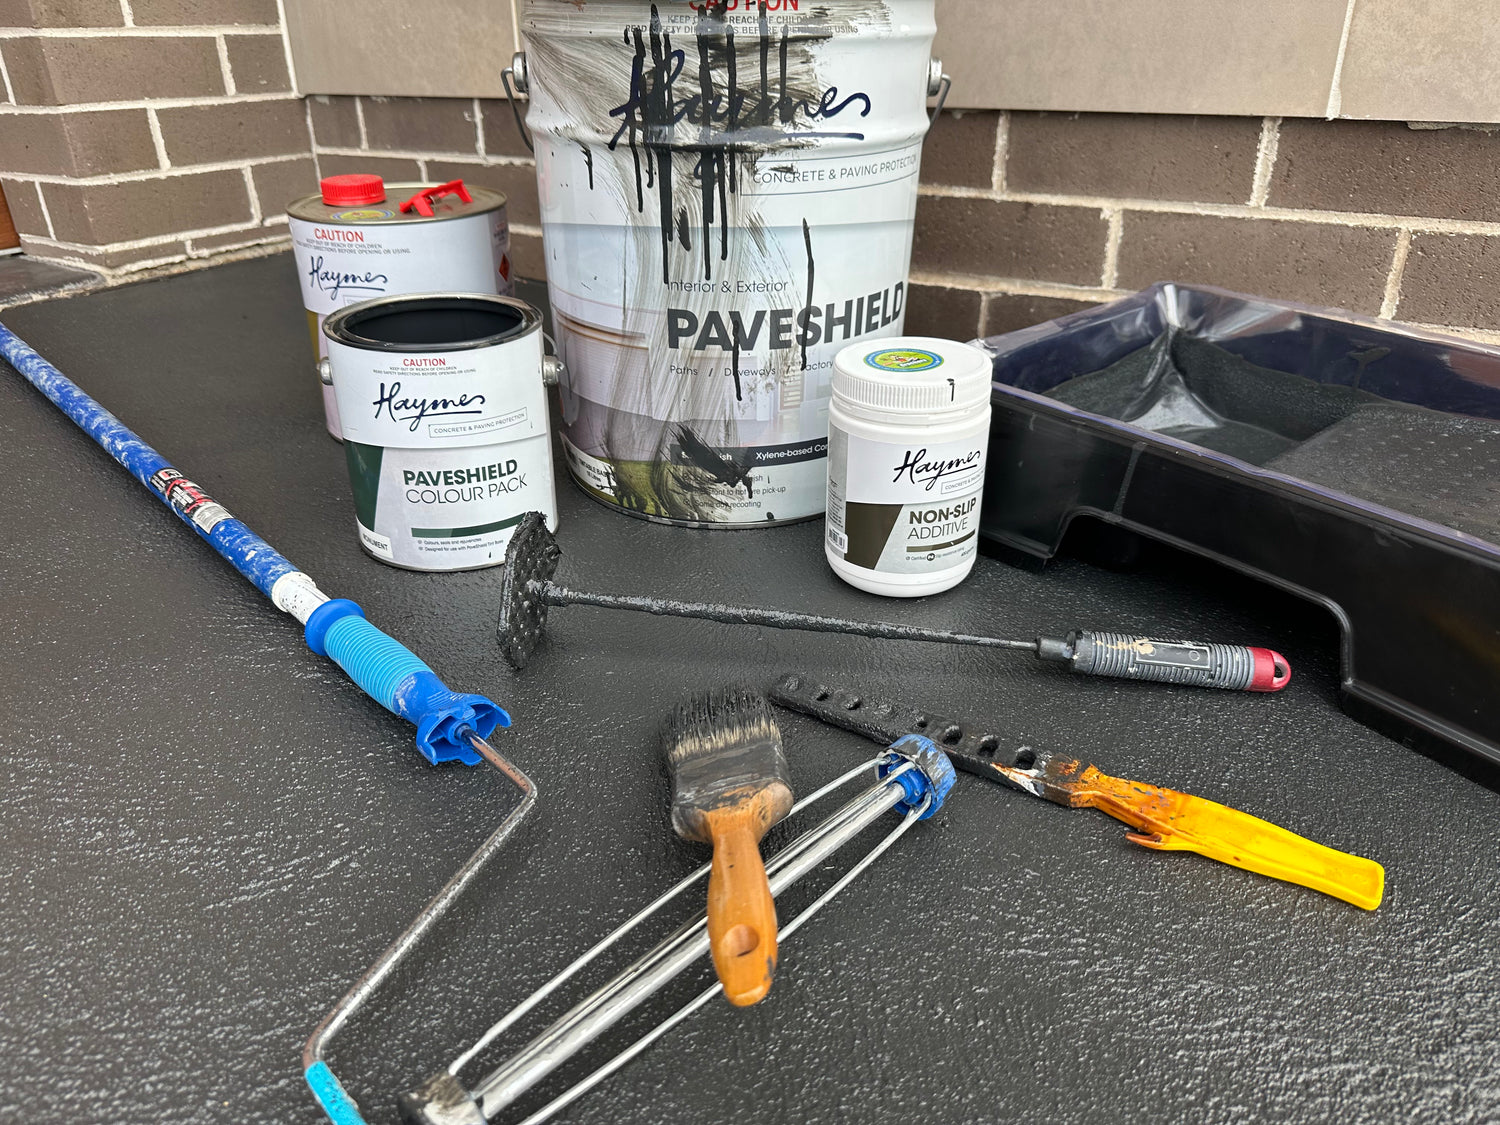 Products needed to paint a concrete driveway in a Monument coloured sealer call Haymes Paveshield